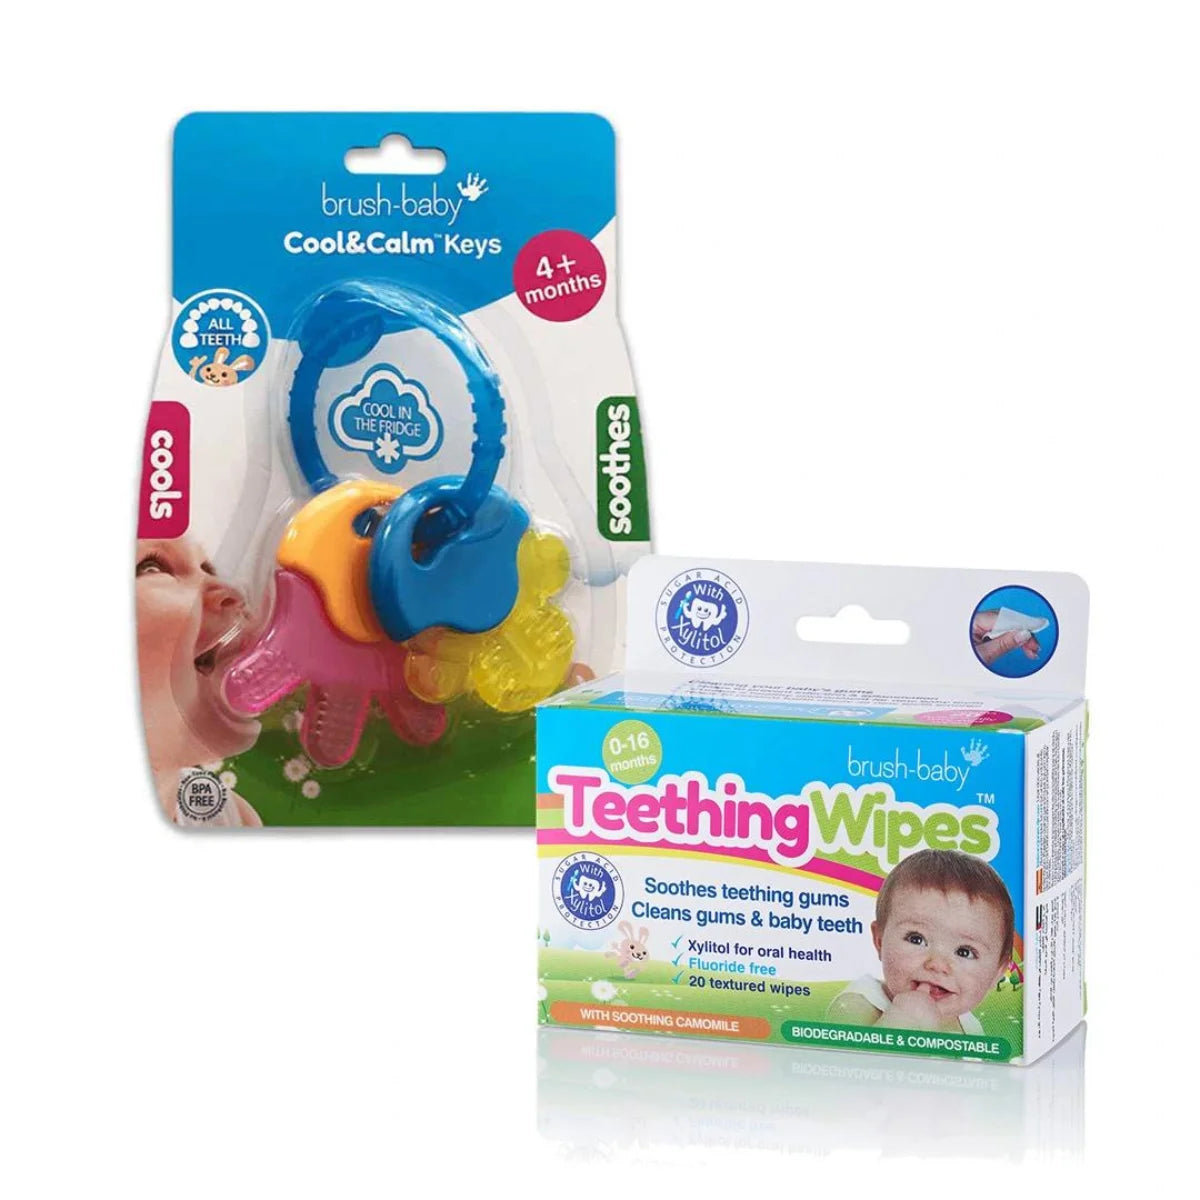 Cool and Calm baby teething keys and box of baby teething wipes for teething toddlers